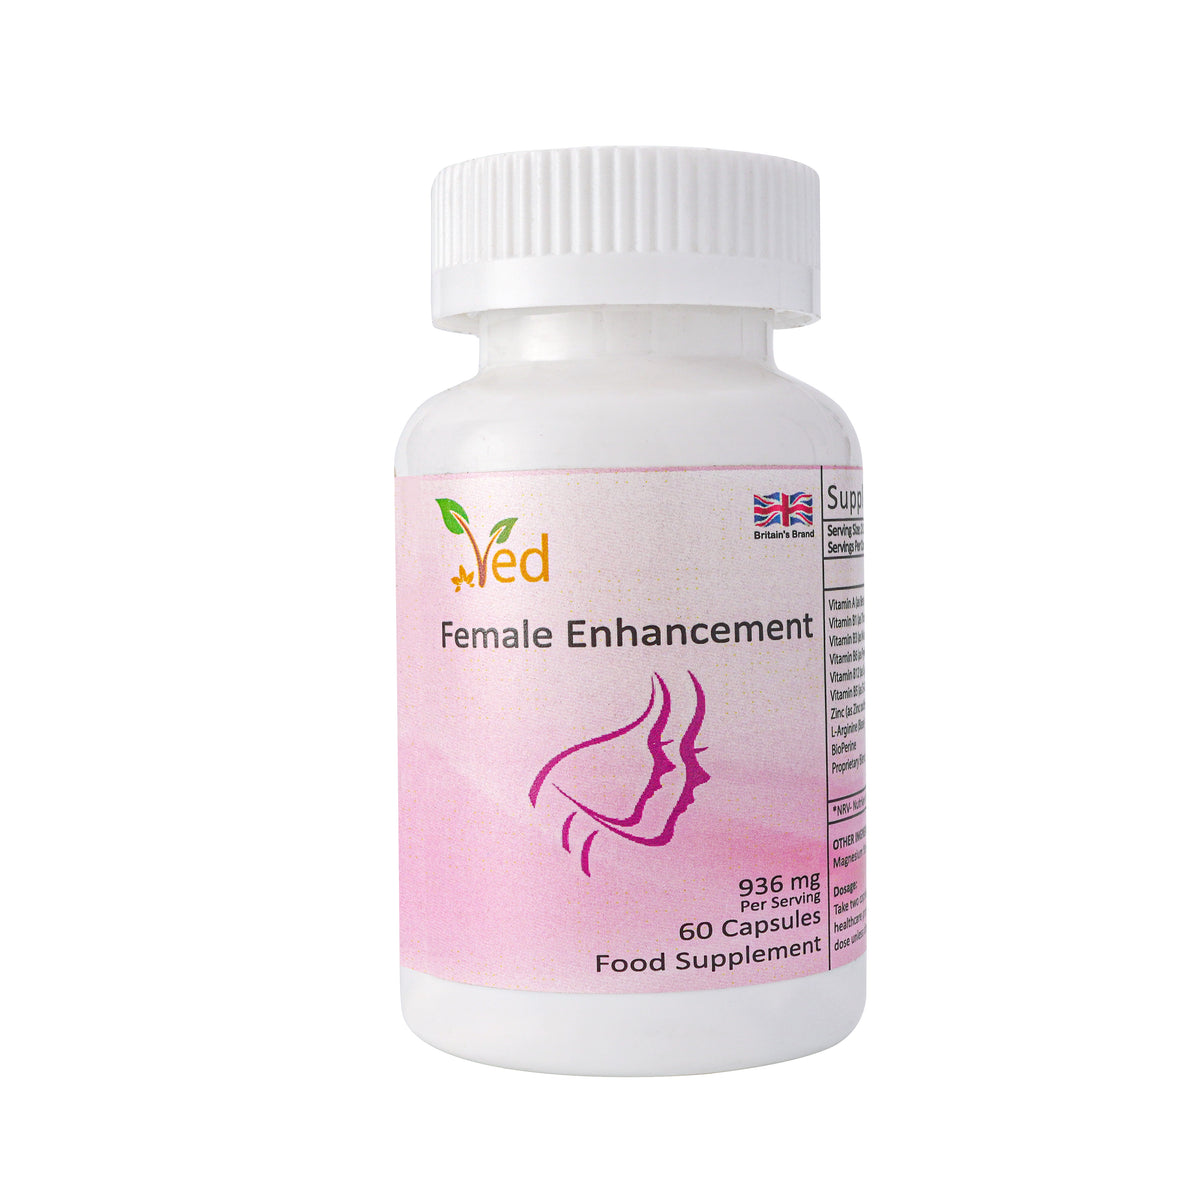 Ved Female Enhancement Multi-Nutrient Support for Women – A Natural Booster Supplement Containing multivitamins and bioperine to Help Discover You Again,936 mg per Serving 60 Capsule(30 Days Supply)